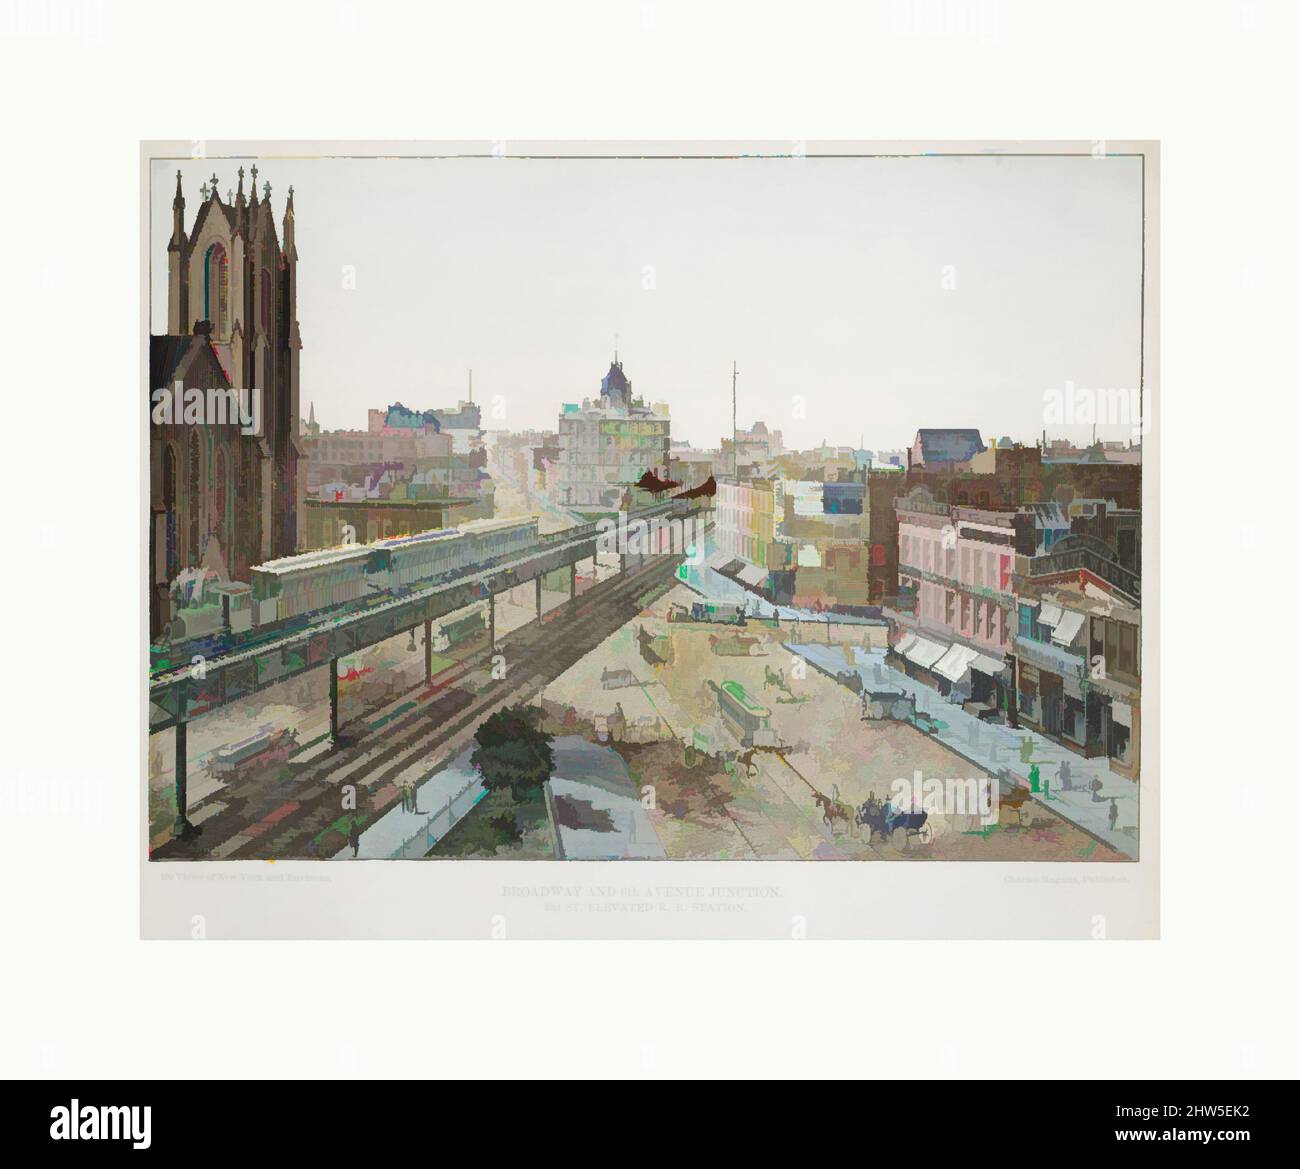 Art inspired by Broadway and 6th Avenue Junction. 33rd St. Elevated R.R. Station, 1850–1900, Wood engraving, hand colored, 11 x 8 1/2 in. (27.9 x 21.6 cm), Prints, Classic works modernized by Artotop with a splash of modernity. Shapes, color and value, eye-catching visual impact on art. Emotions through freedom of artworks in a contemporary way. A timeless message pursuing a wildly creative new direction. Artists turning to the digital medium and creating the Artotop NFT Stock Photo